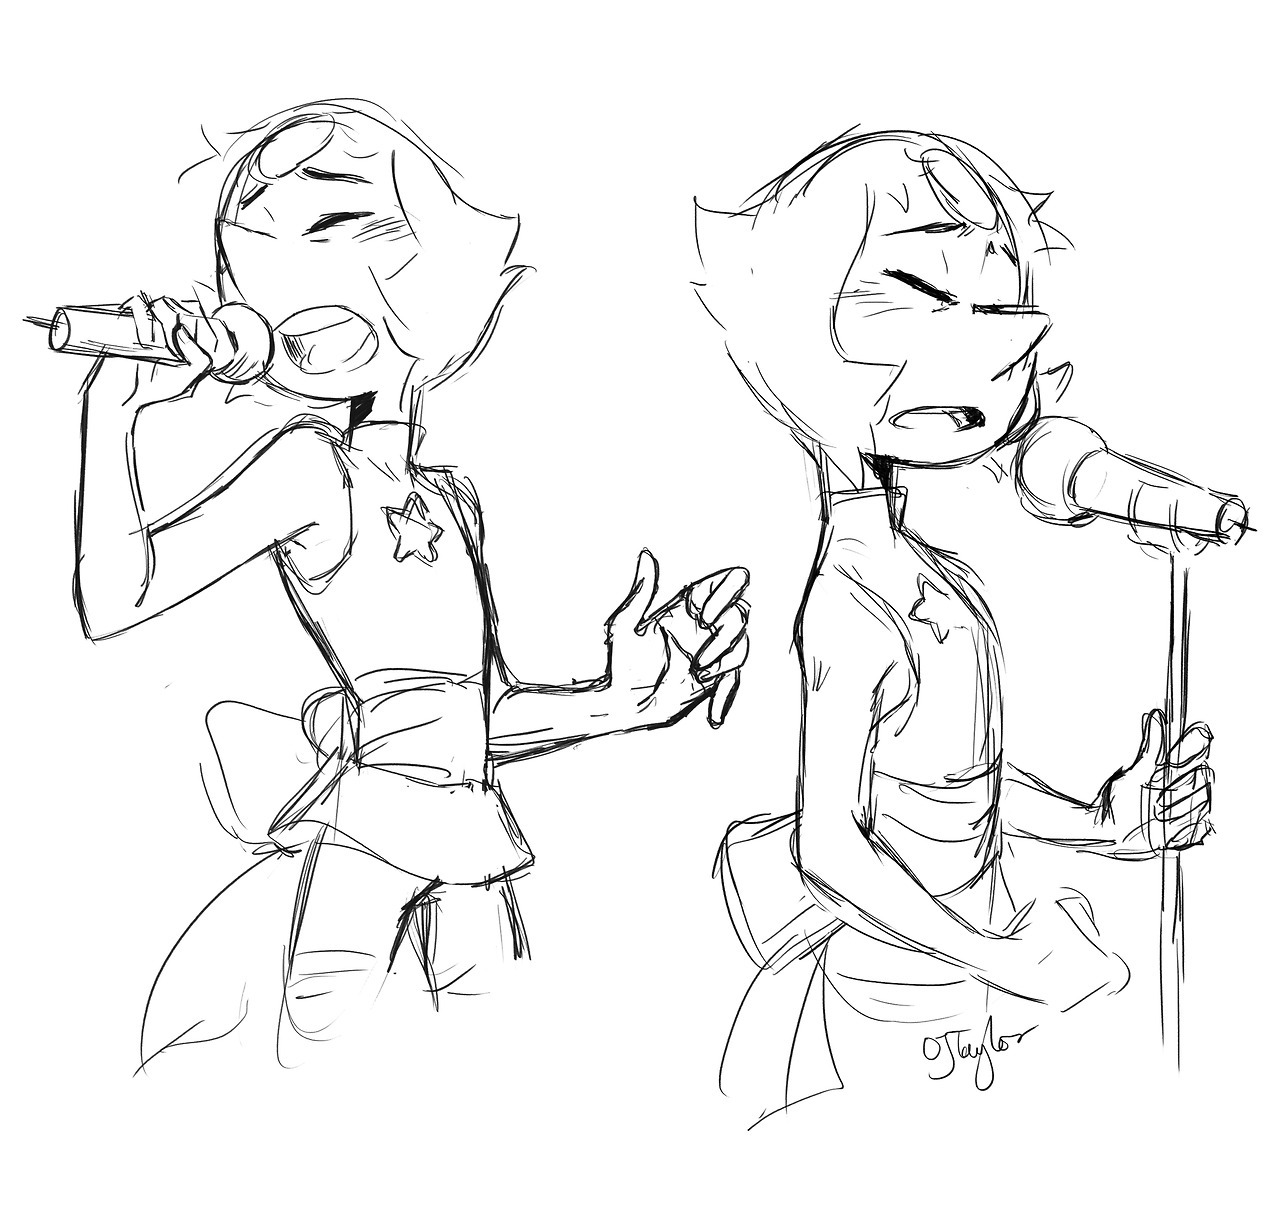 I missed drawing pearl